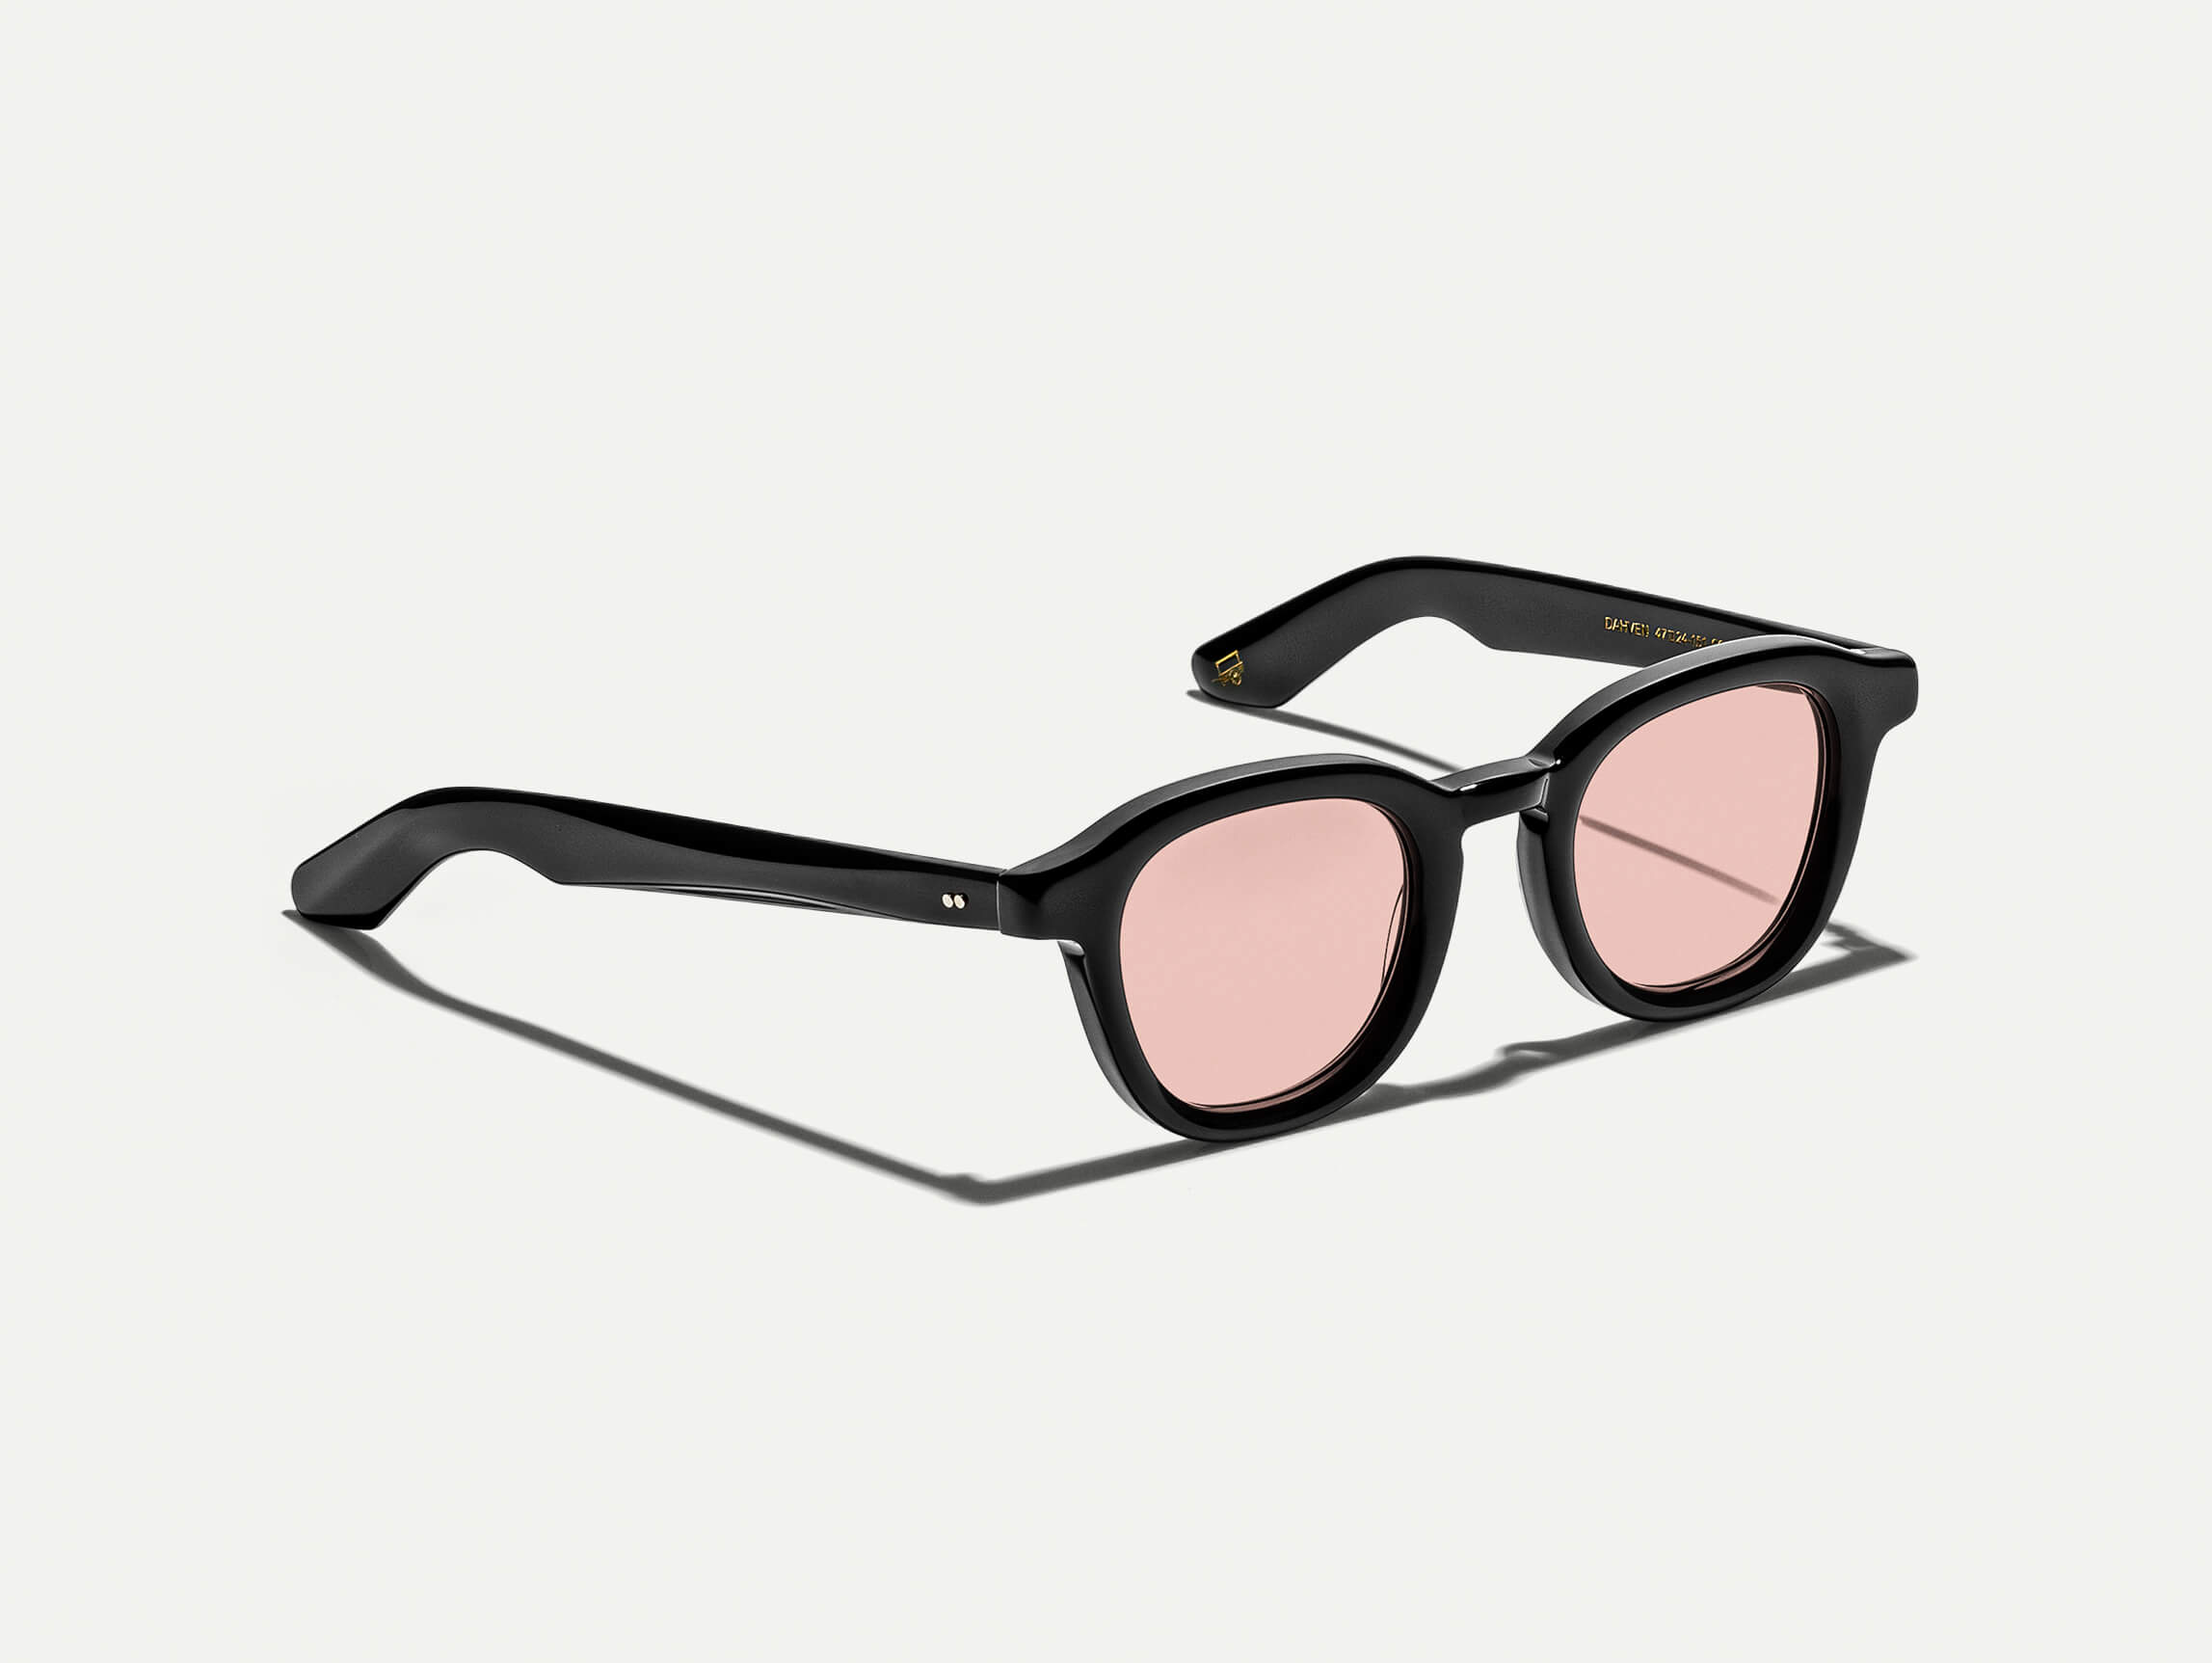 The DAHVEN Black with New York Rose Tinted Lenses